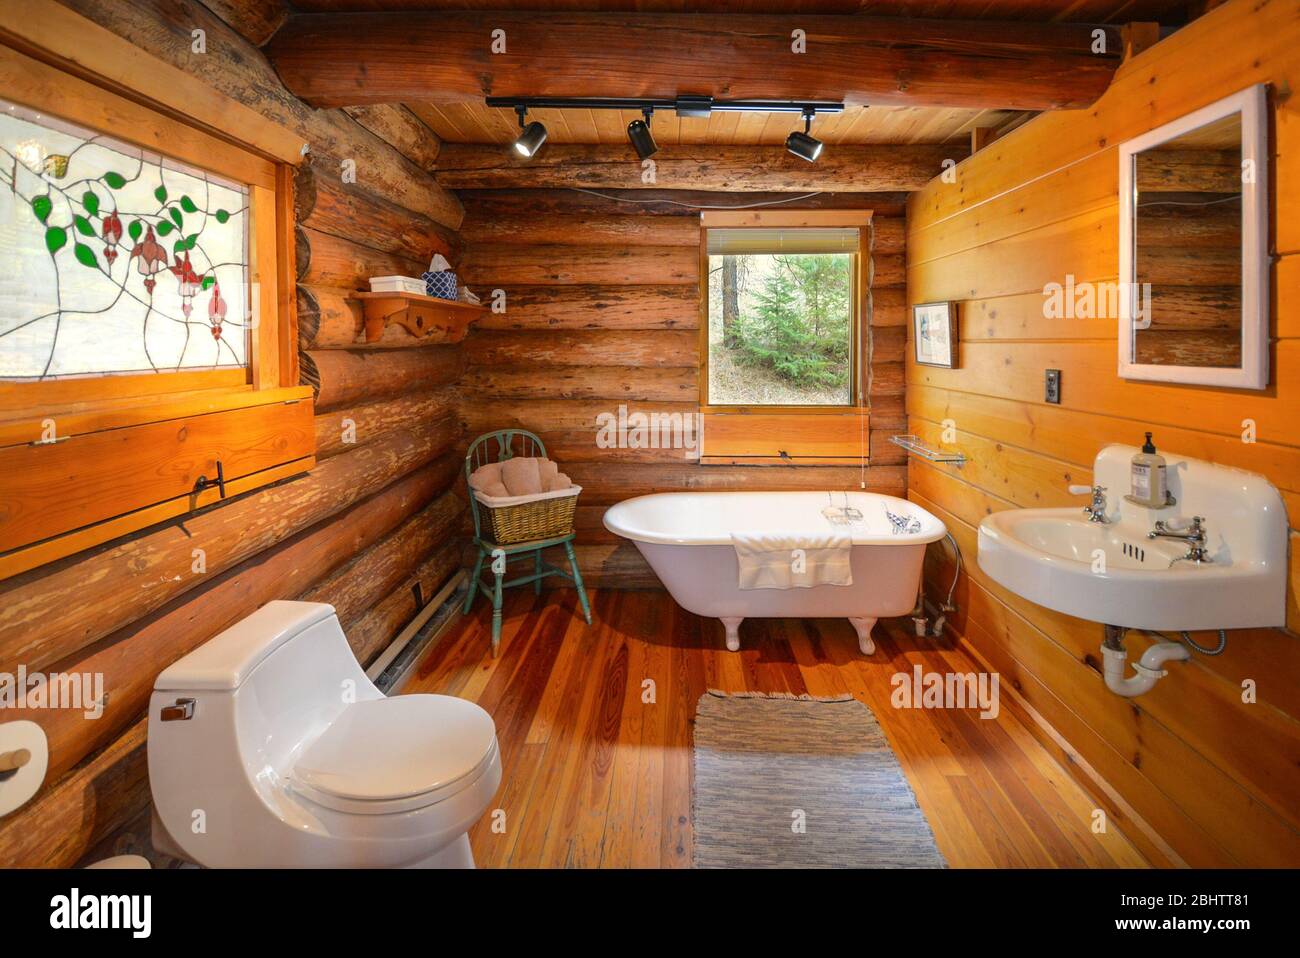 A bathroom in a rustic mountain log cabin home with sink, toilet and clawfoot tub. Stock Photo